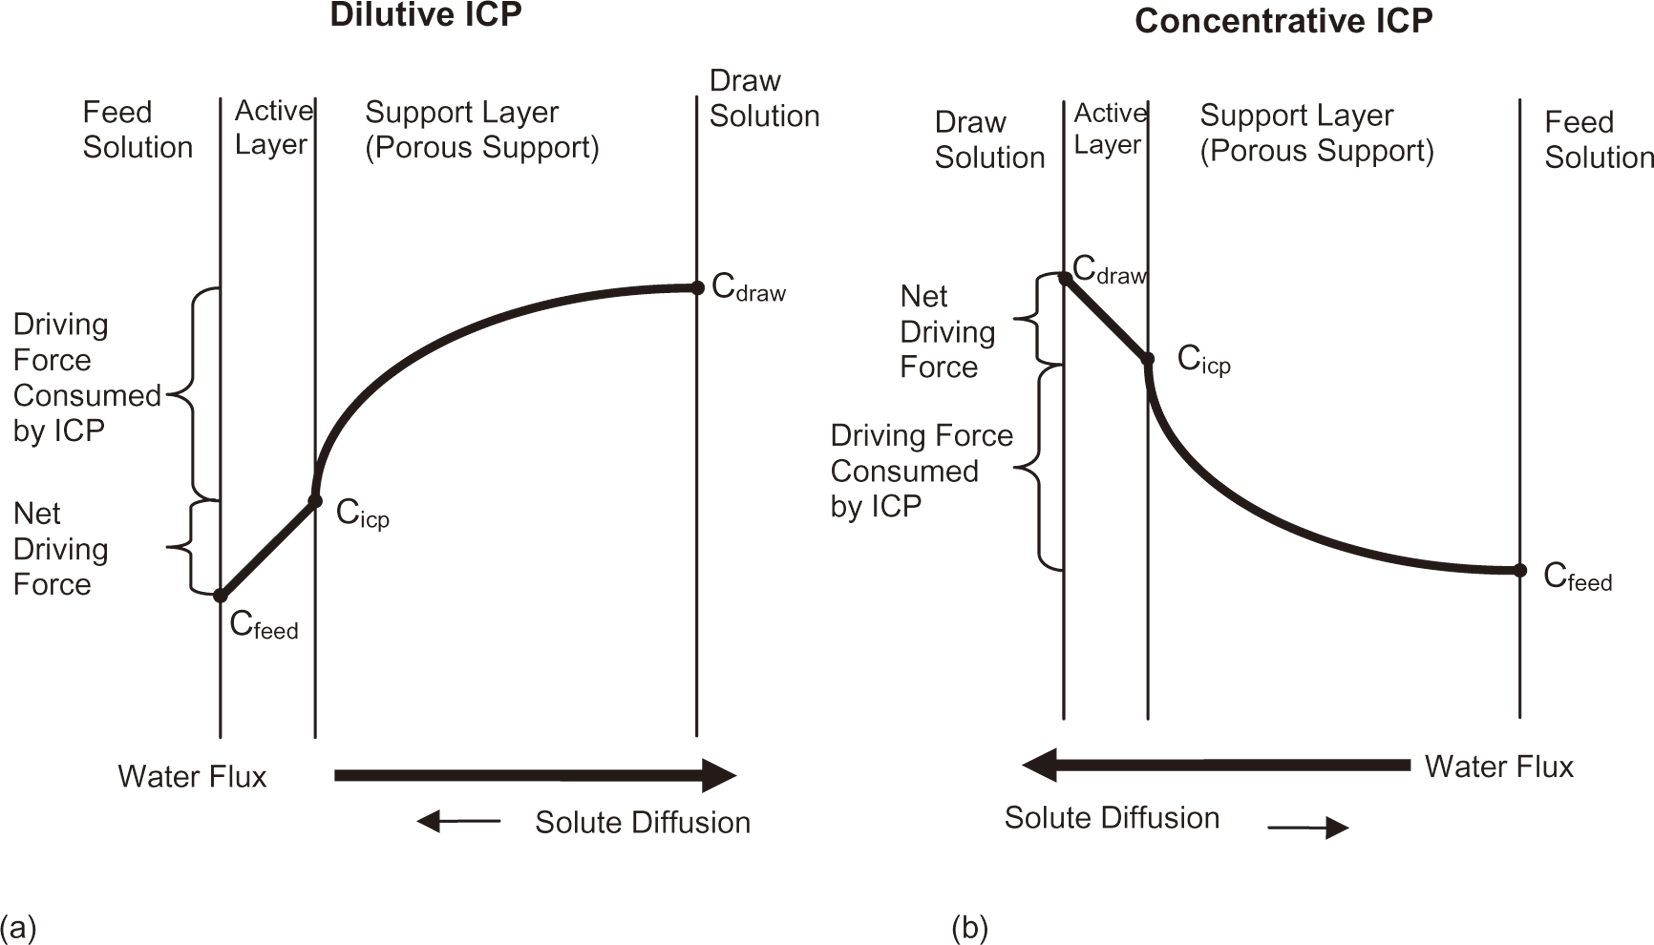 The schematic representation of dilutive (a) and concentrative (b) internalconcentration polarizatioin(ICP)